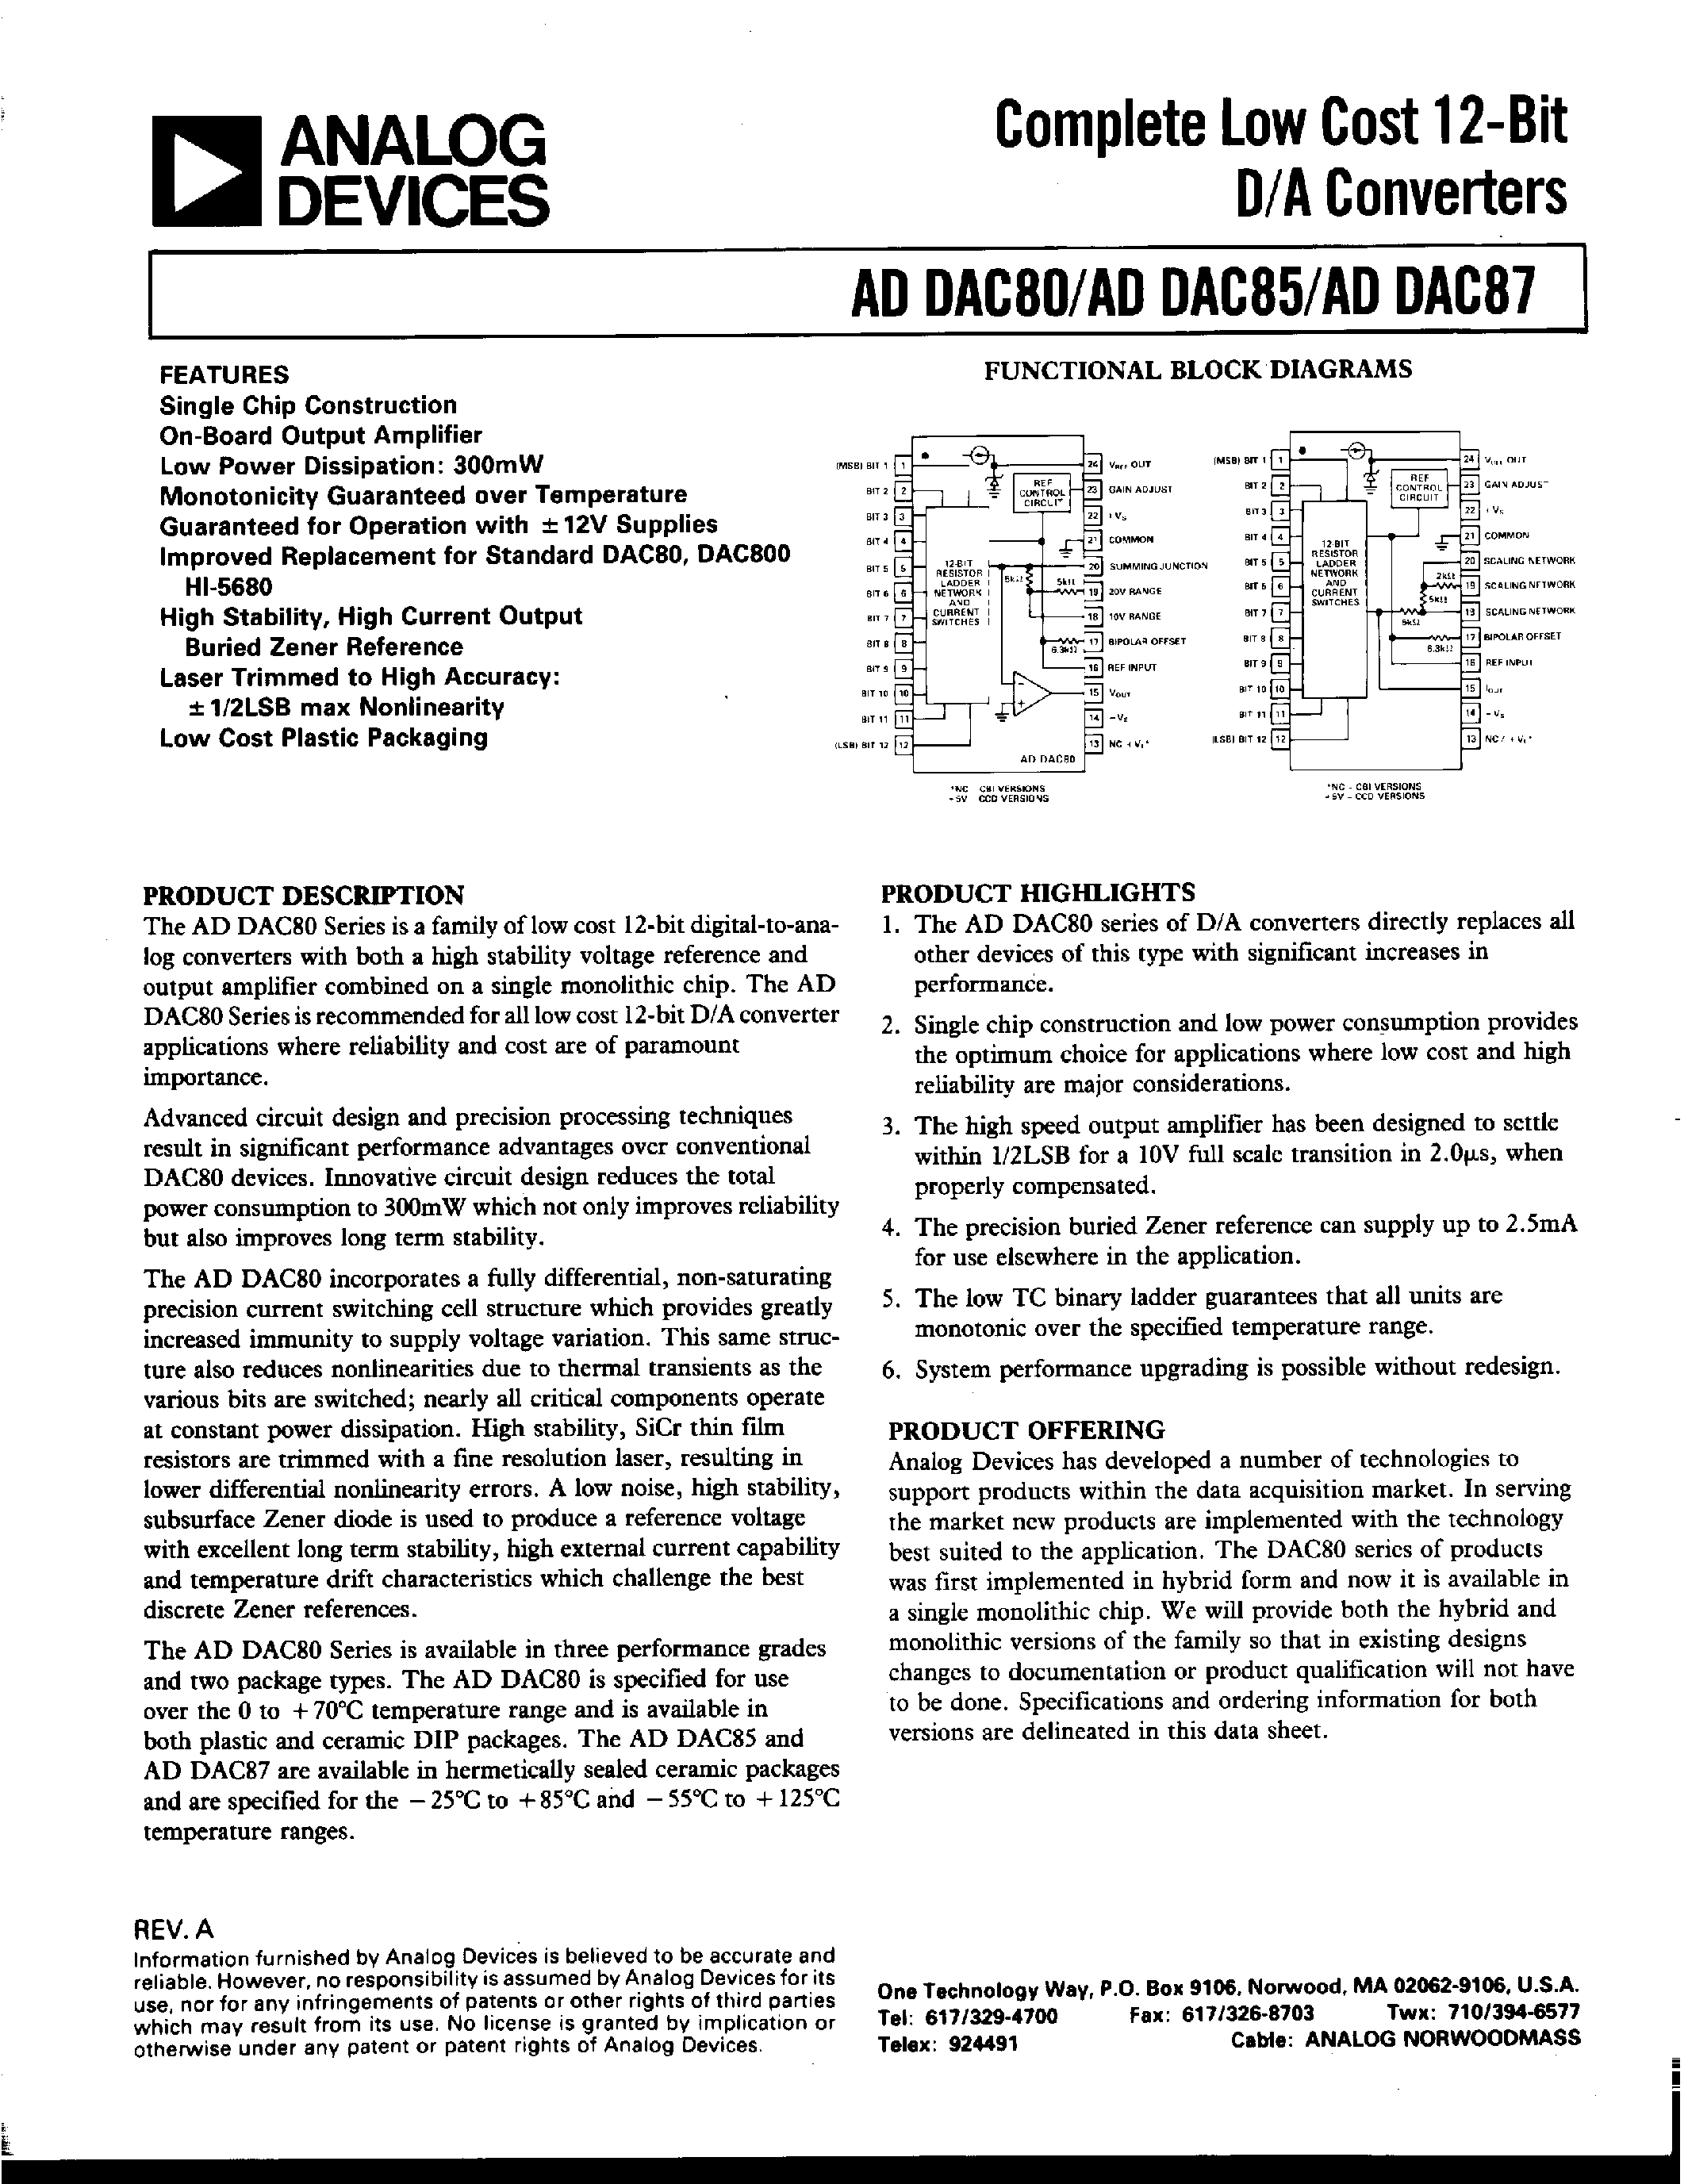 Datasheet ADDAC85MIL-CBI-V - COMPLETE LOW COST 12-BIT D/A CONVERTERS page 1